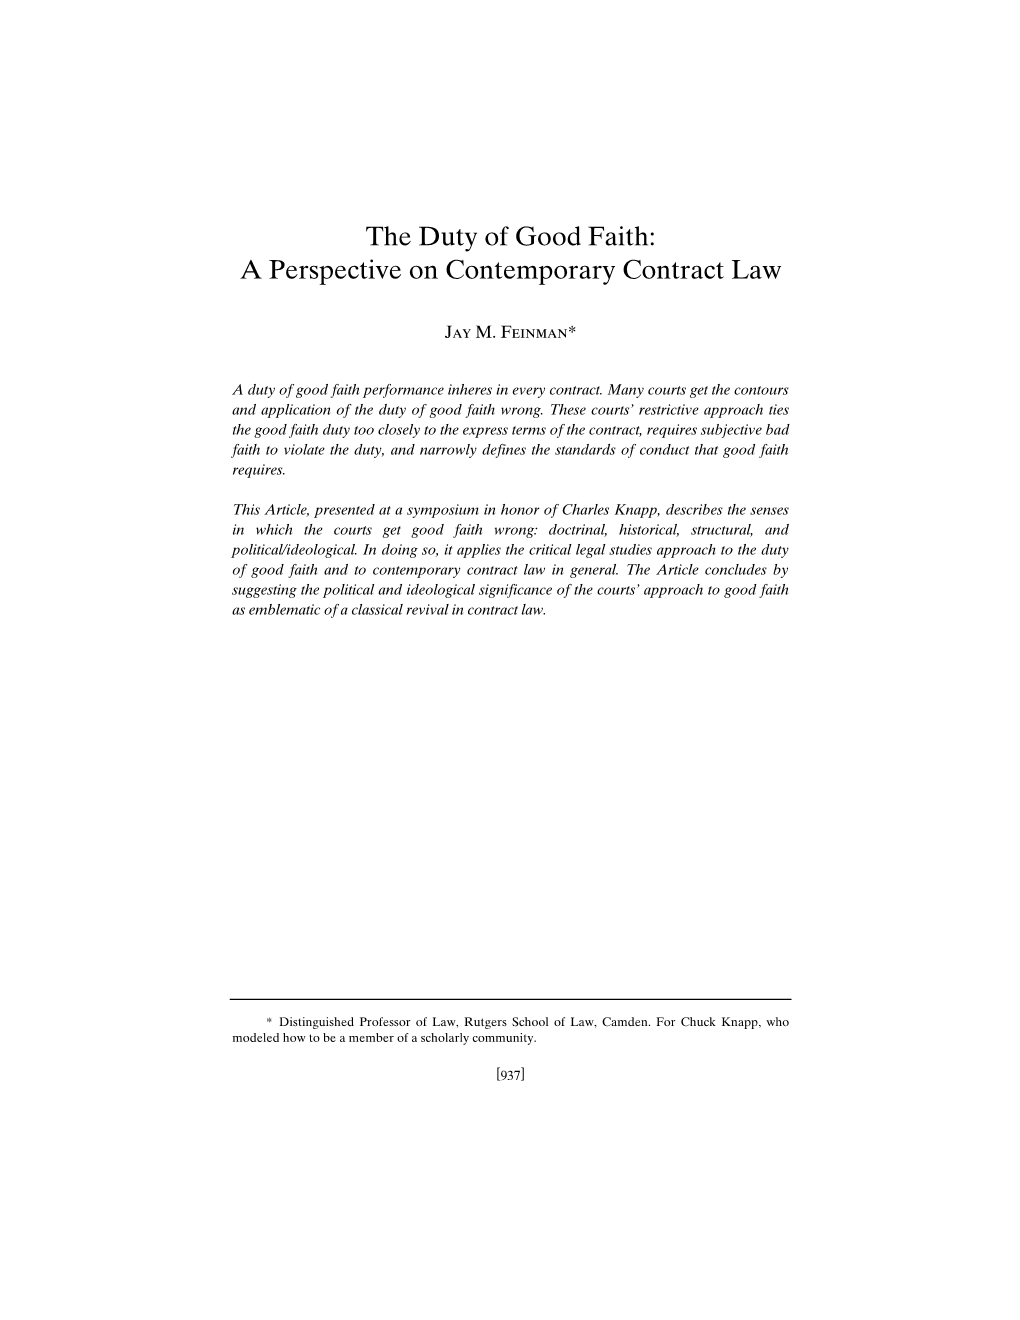 The Duty of Good Faith: a Perspective on Contemporary Contract Law